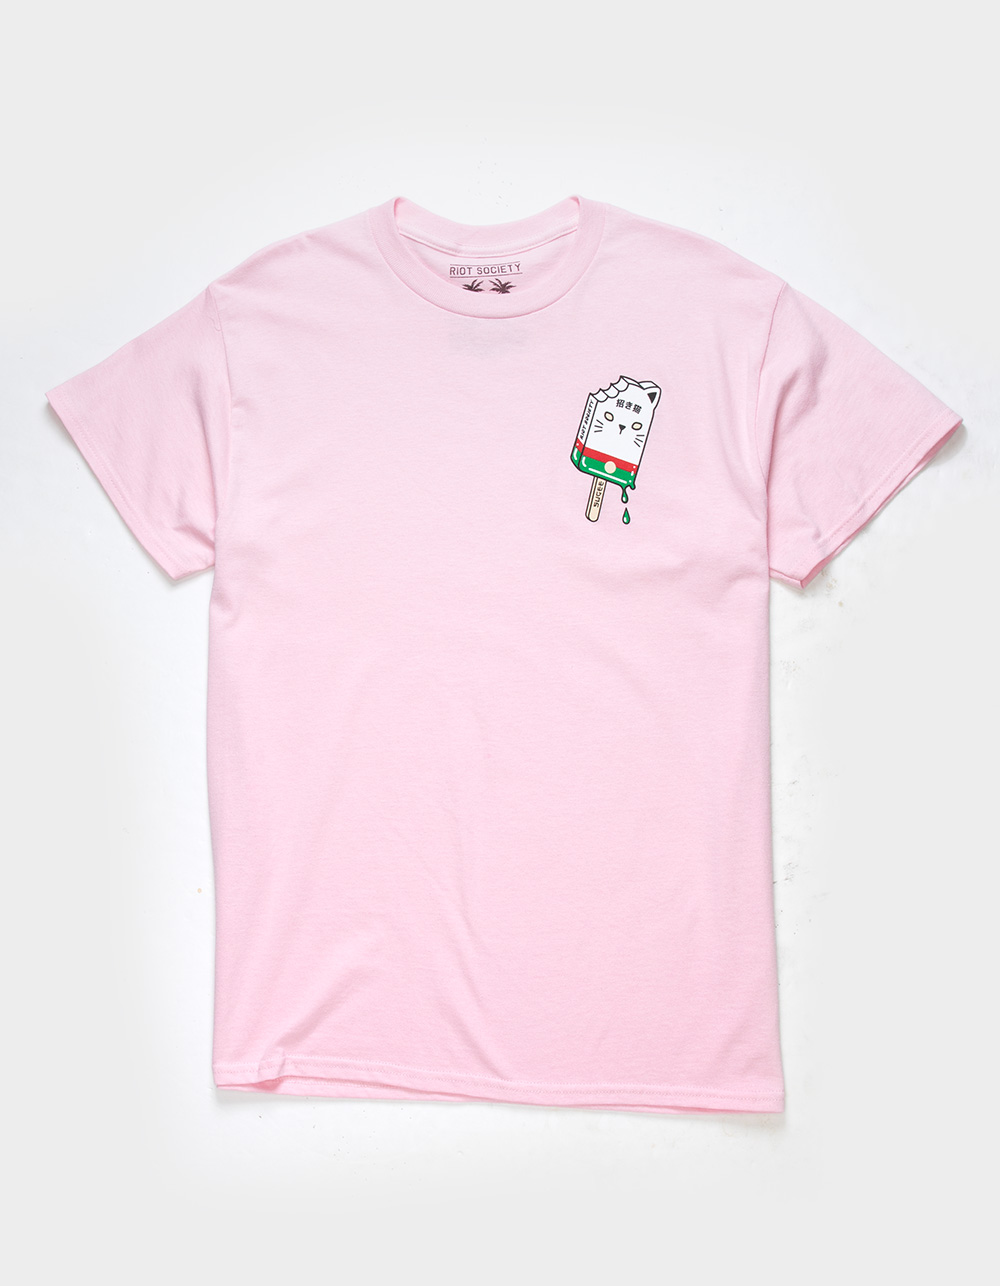 RIOT SOCIETY LIGHT Tee Sugee | PINK - Tillys Cat Popsicle Mens